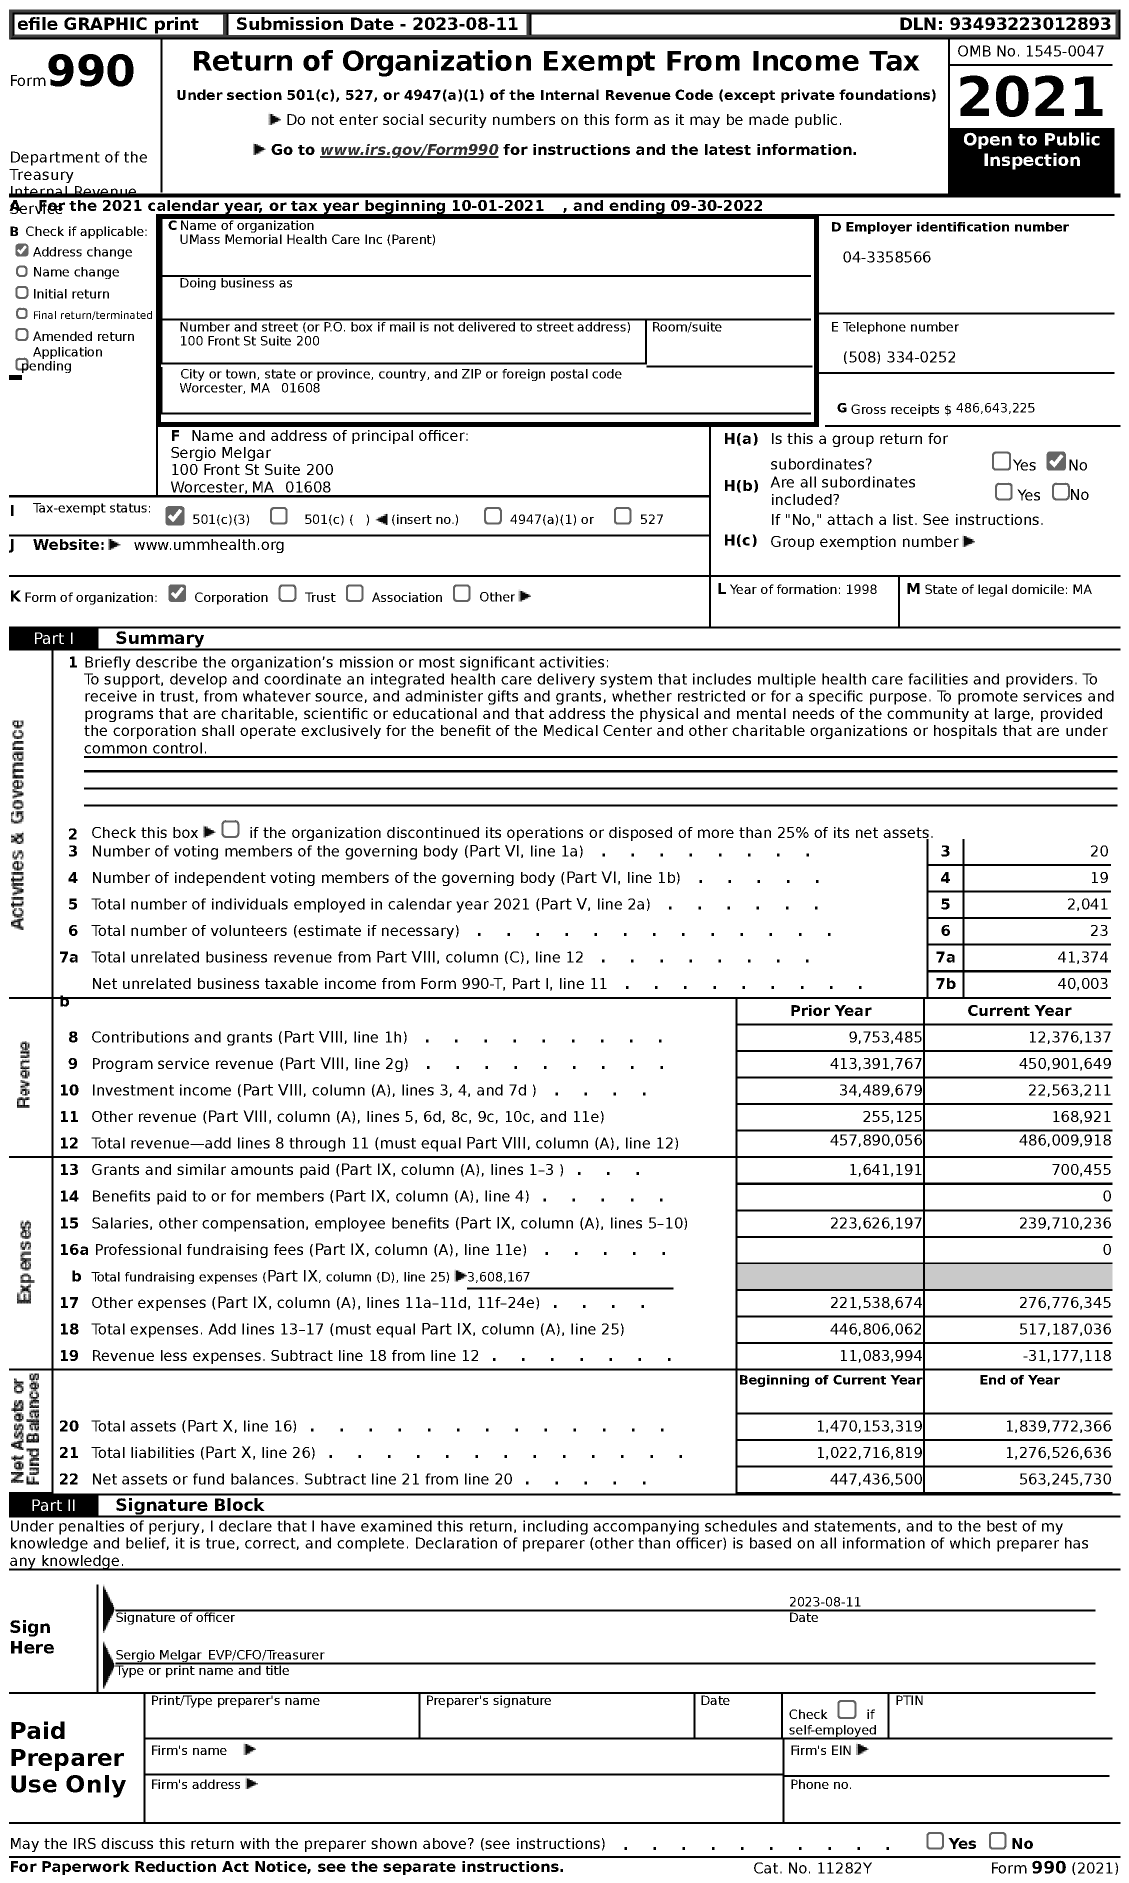 Image of first page of 2021 Form 990 for UMass Memorial Health Care (UMMHC)